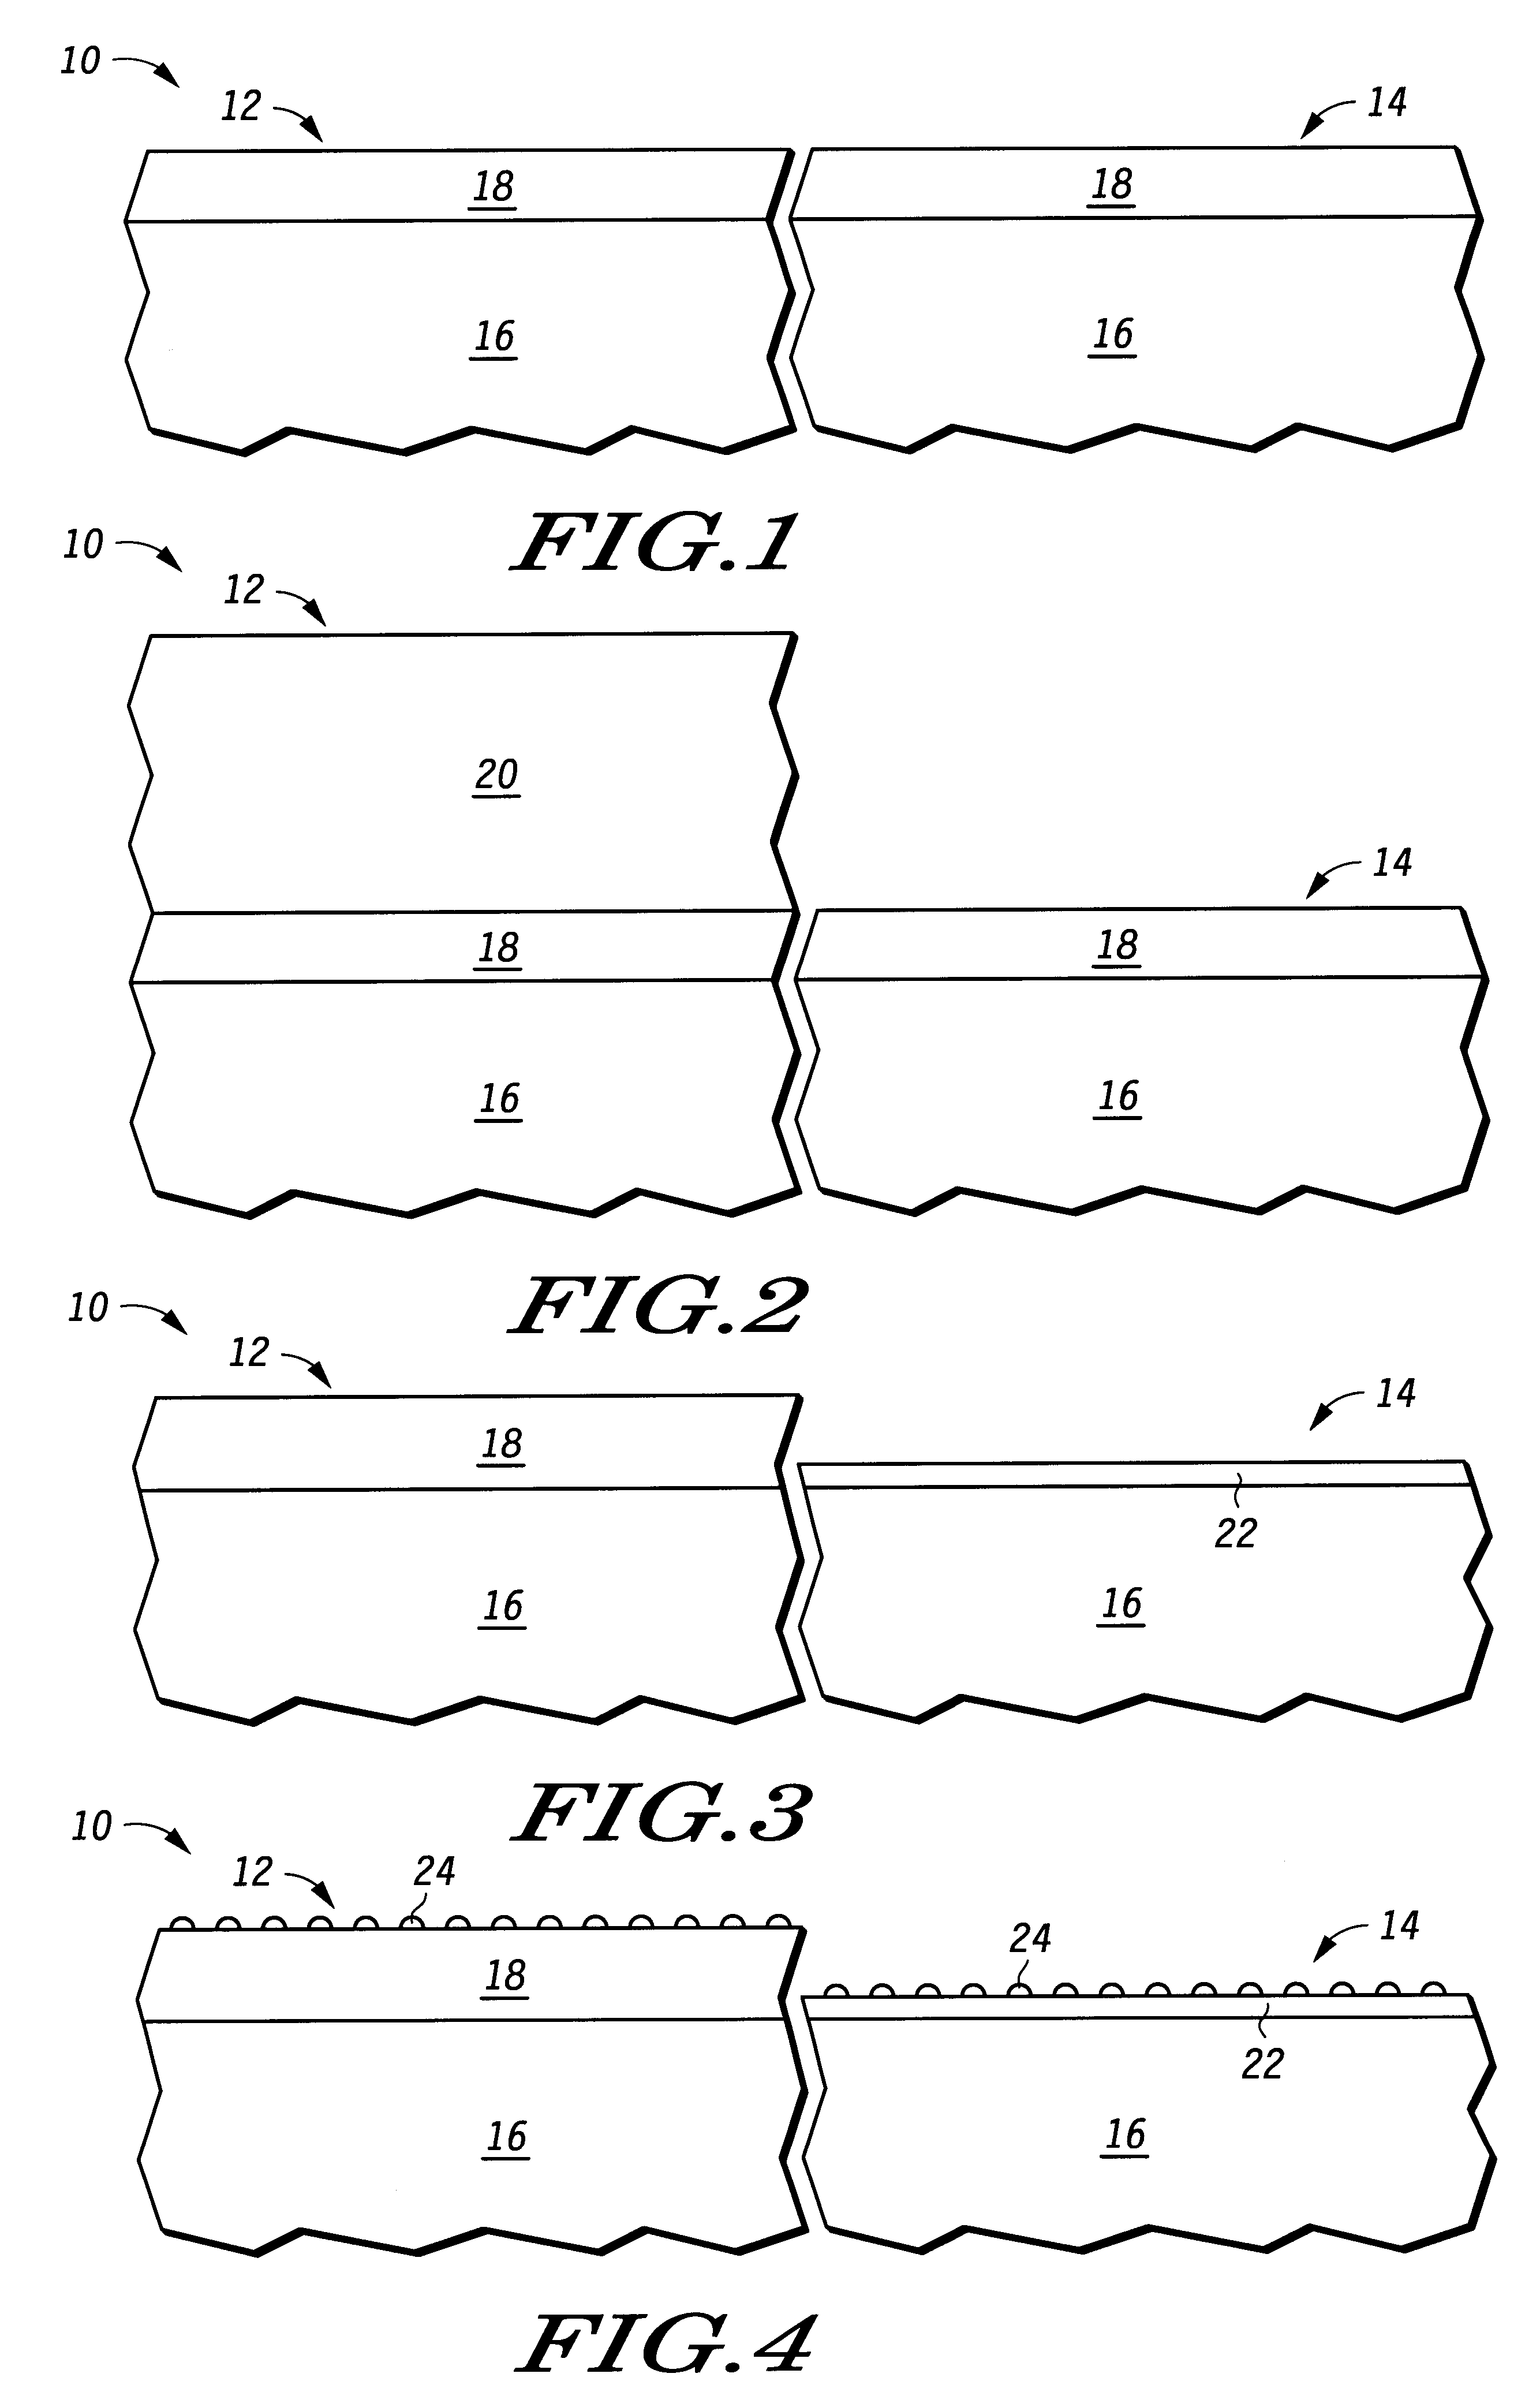 Integration of two memory types on the same integrated circuit